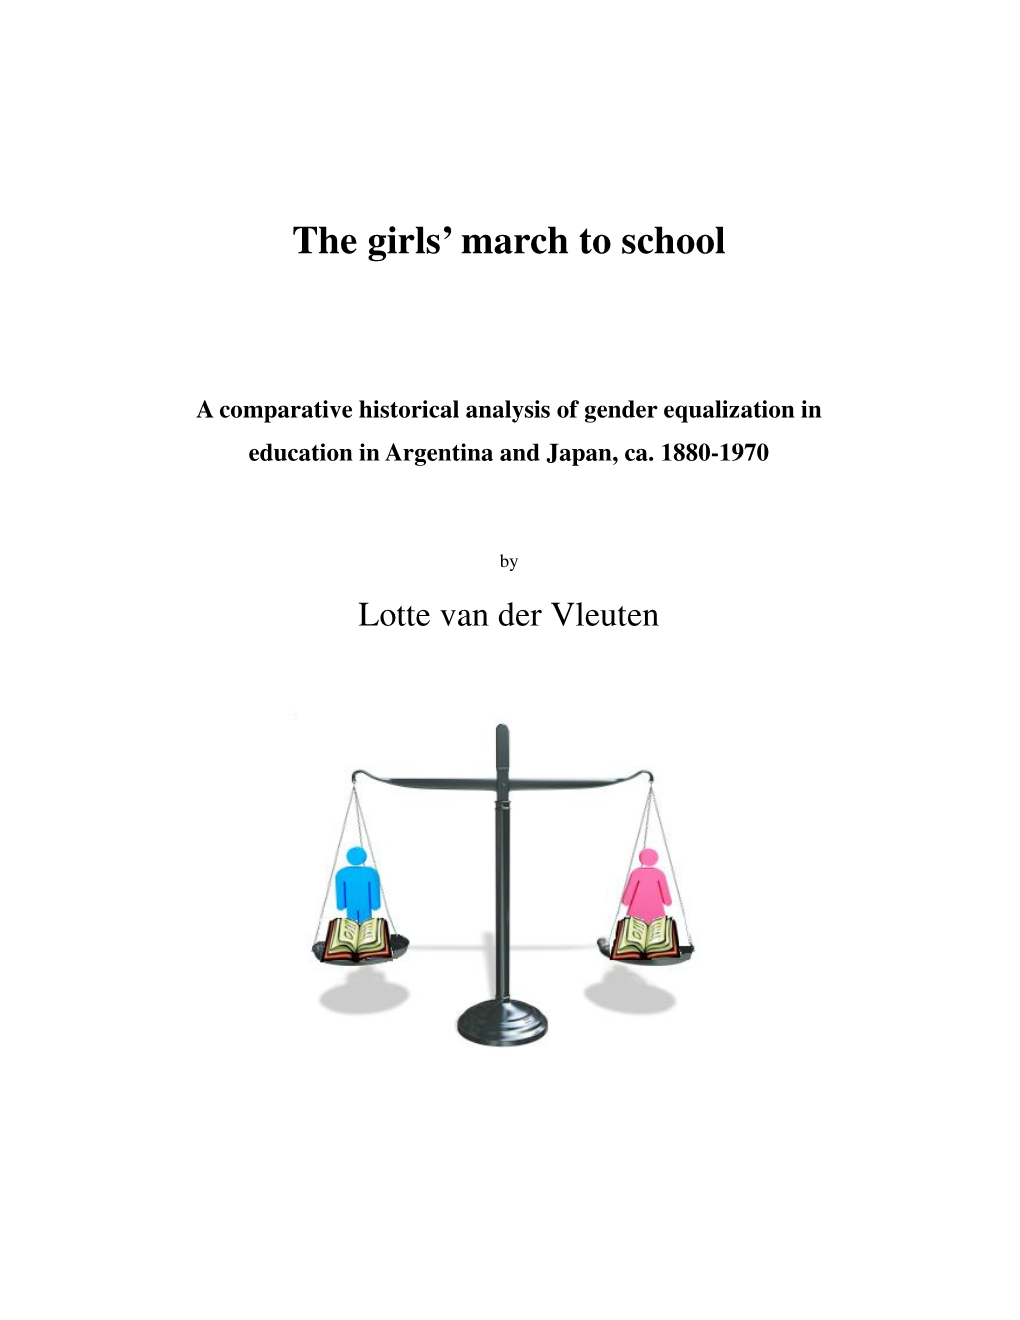 The Girls' March to School